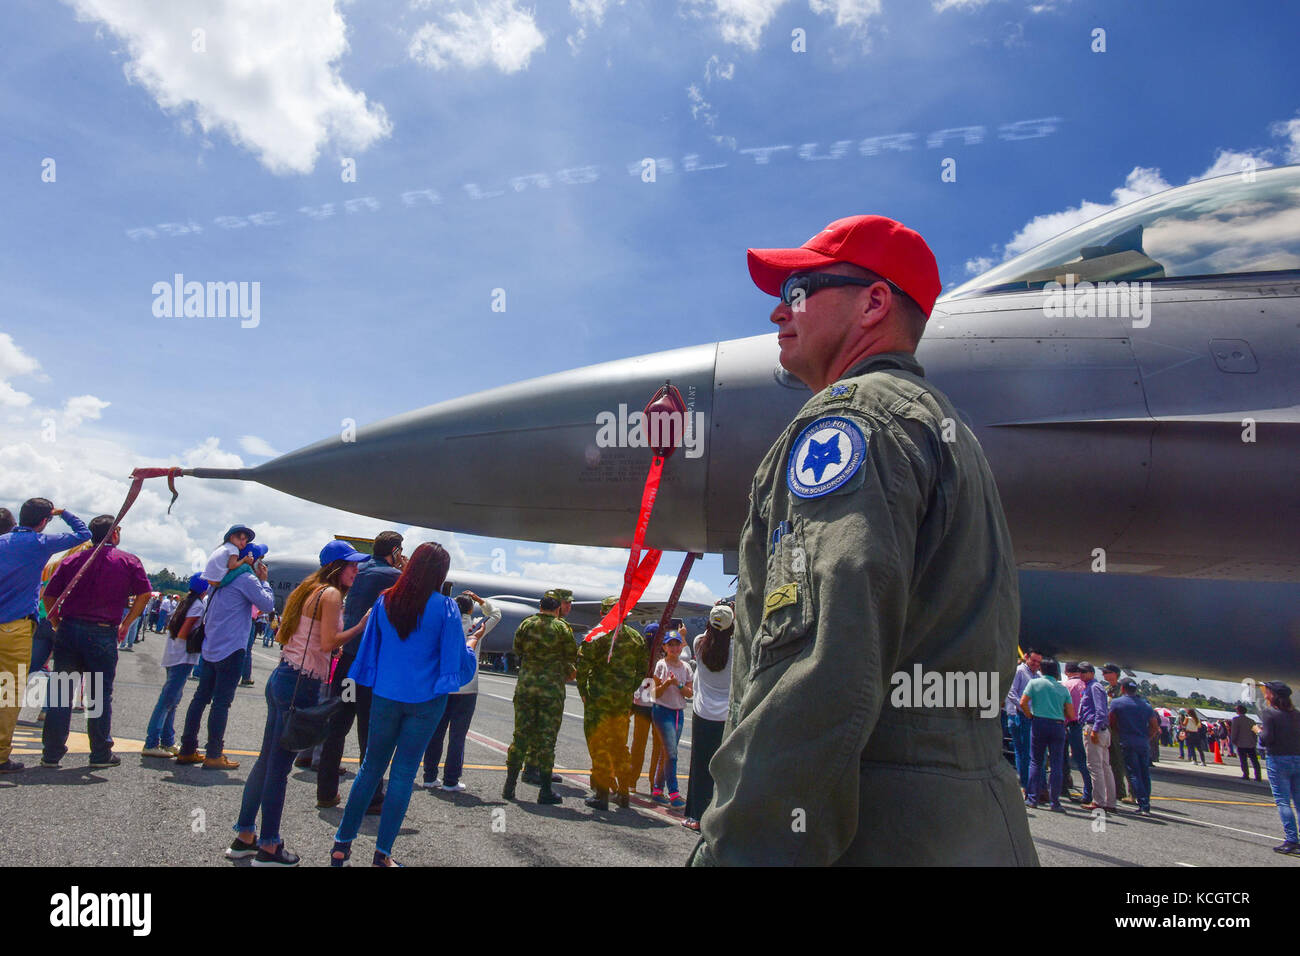 U.S. Air Force Lt. Col. Andrew Thorne, a fighter pilot assigned to the 157th Fighter Squadron, stands next to a U.S. Air Force F-16 Fighting Falcon assigned to the South Carolina Air National Guard’s 169th Fighter Wing while at José María Córdova International Airport during F-AIR 2017 in Rionegro, Colombia, July 14, 2017. United States military participation in the air show provides an opportunity to strengthen our military-to-military relationships with regional partners and provides the opportunity to meet with our Colombian air force counterparts and facilitate interoperability, which can  Stock Photo